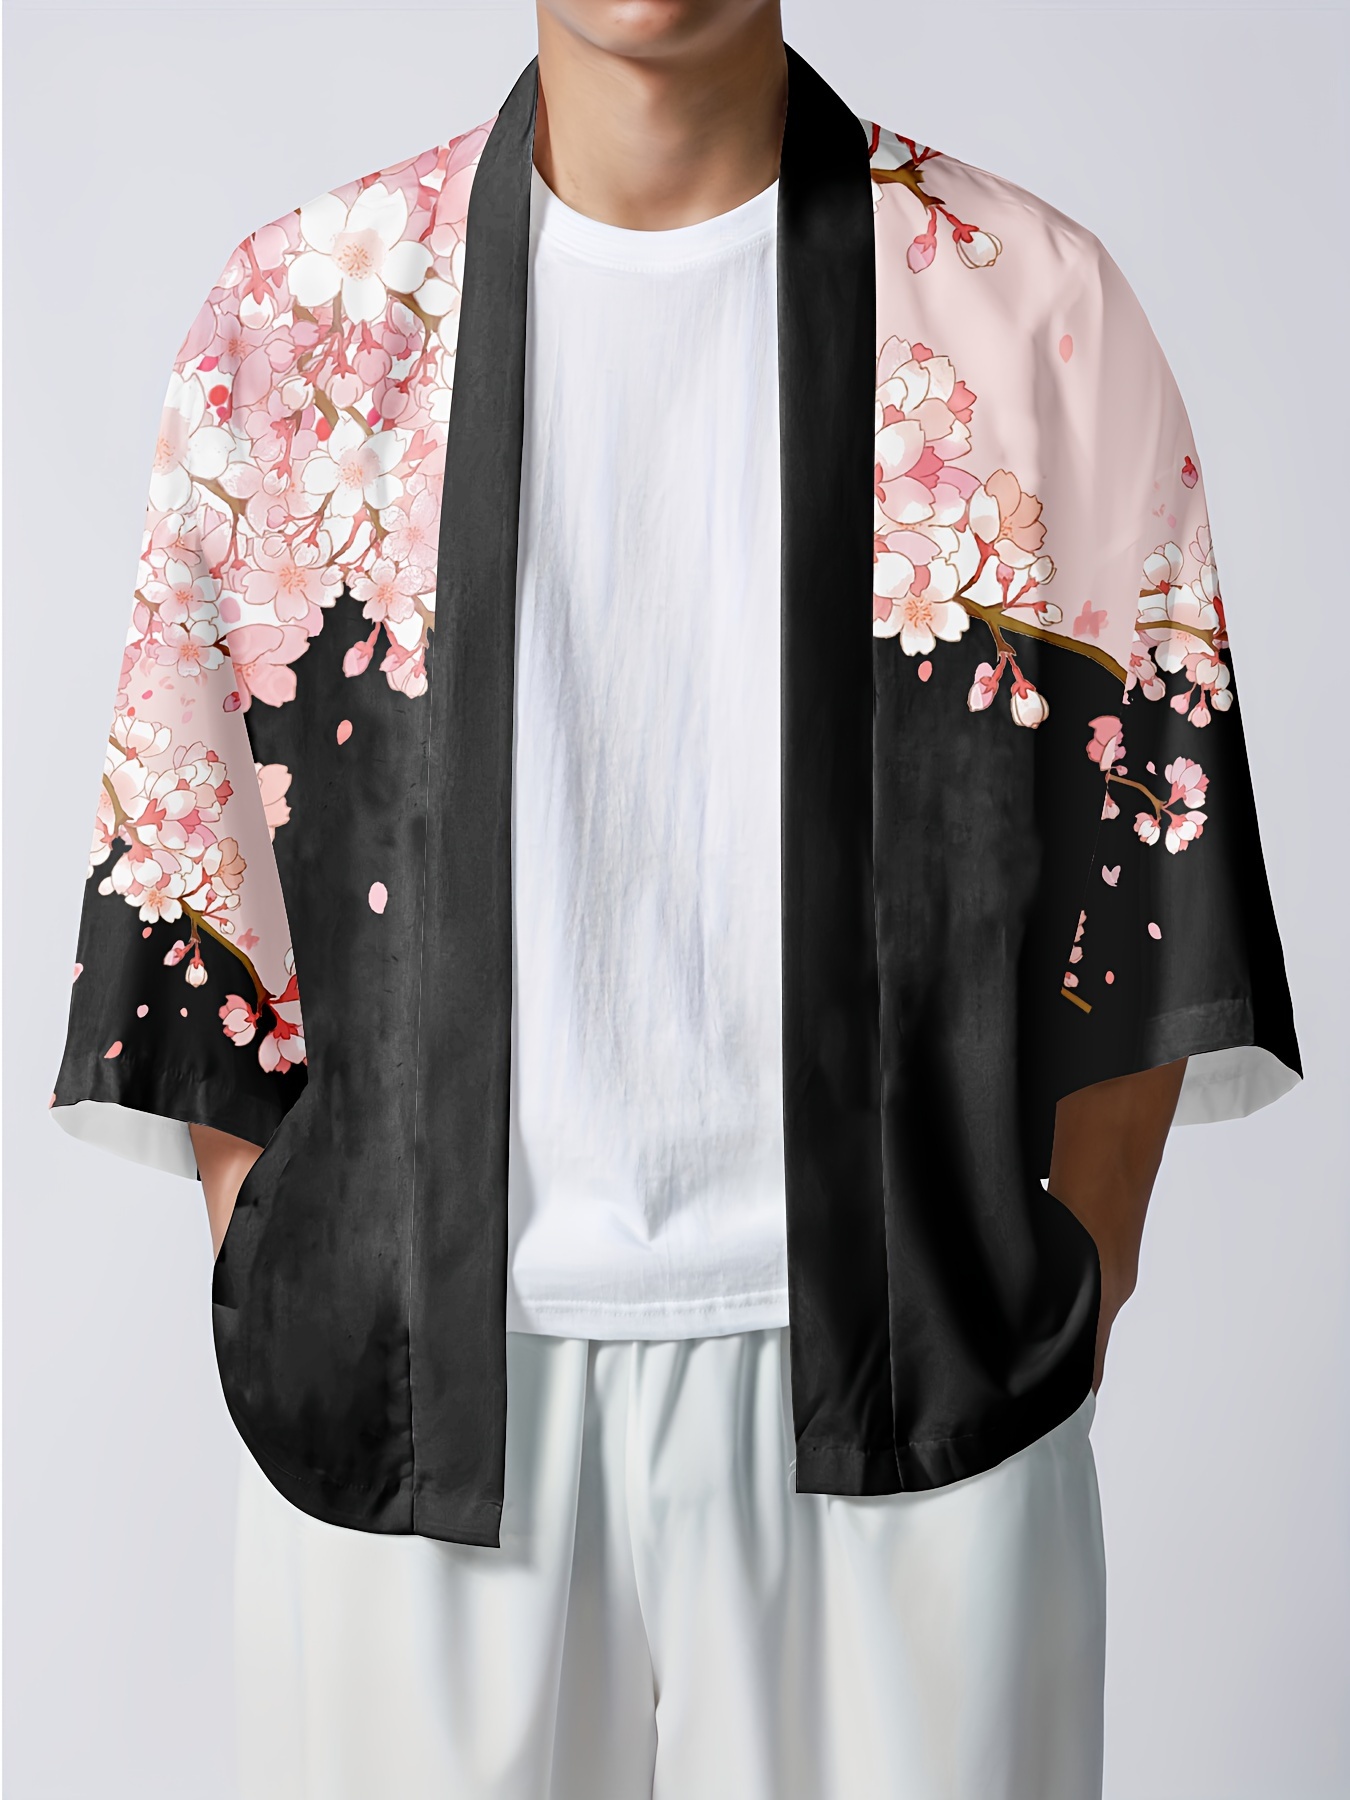 Men's Two Piece Outfits Silky Satin Rose Printed Open Front Kimono Shirt  And Casual Shorts Set In BLACK